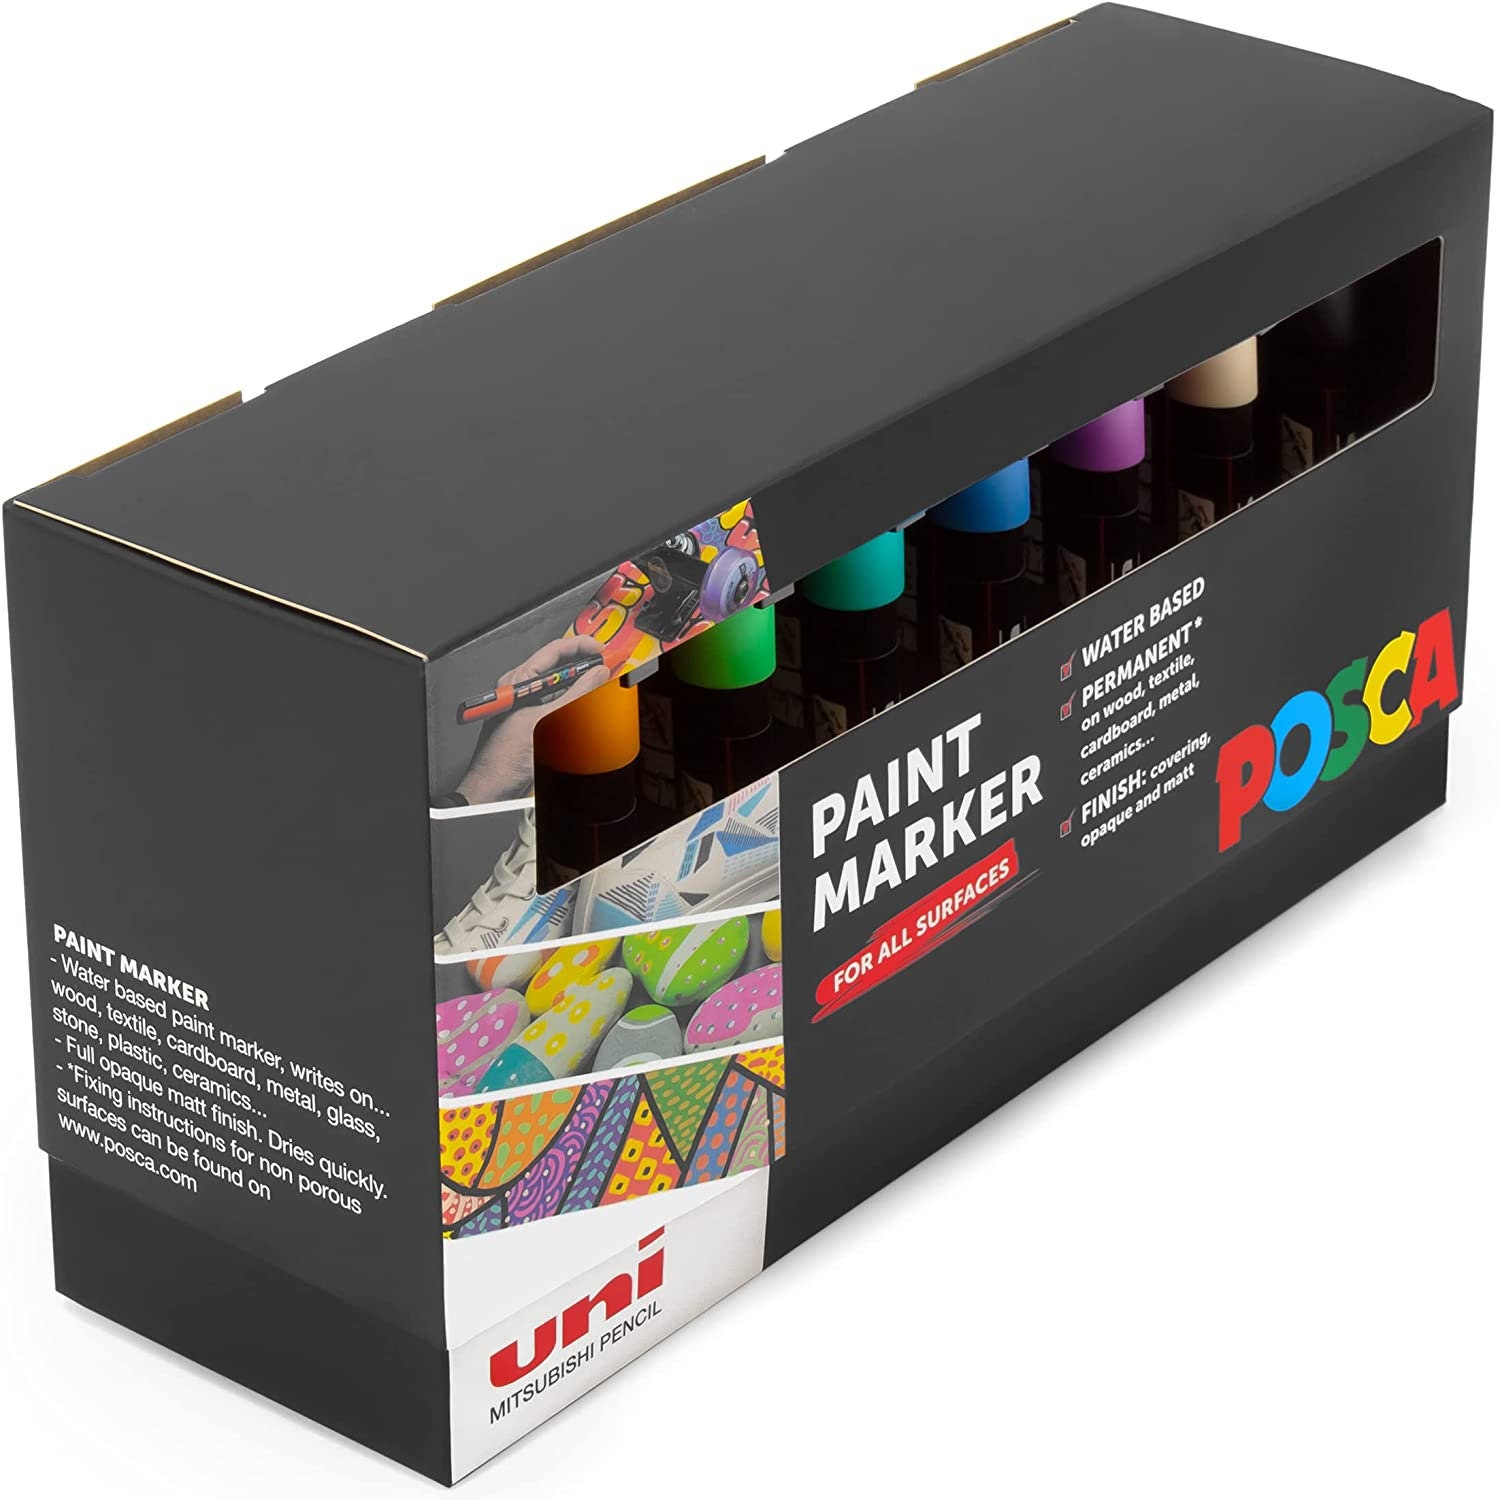 Posca PC-1M Water Based Permanent Marker Paint Pens. Extra Fine Tip for Art  & Crafts. Multi Surface Use On Wood Metal Paper Canvas Cardboard Glass